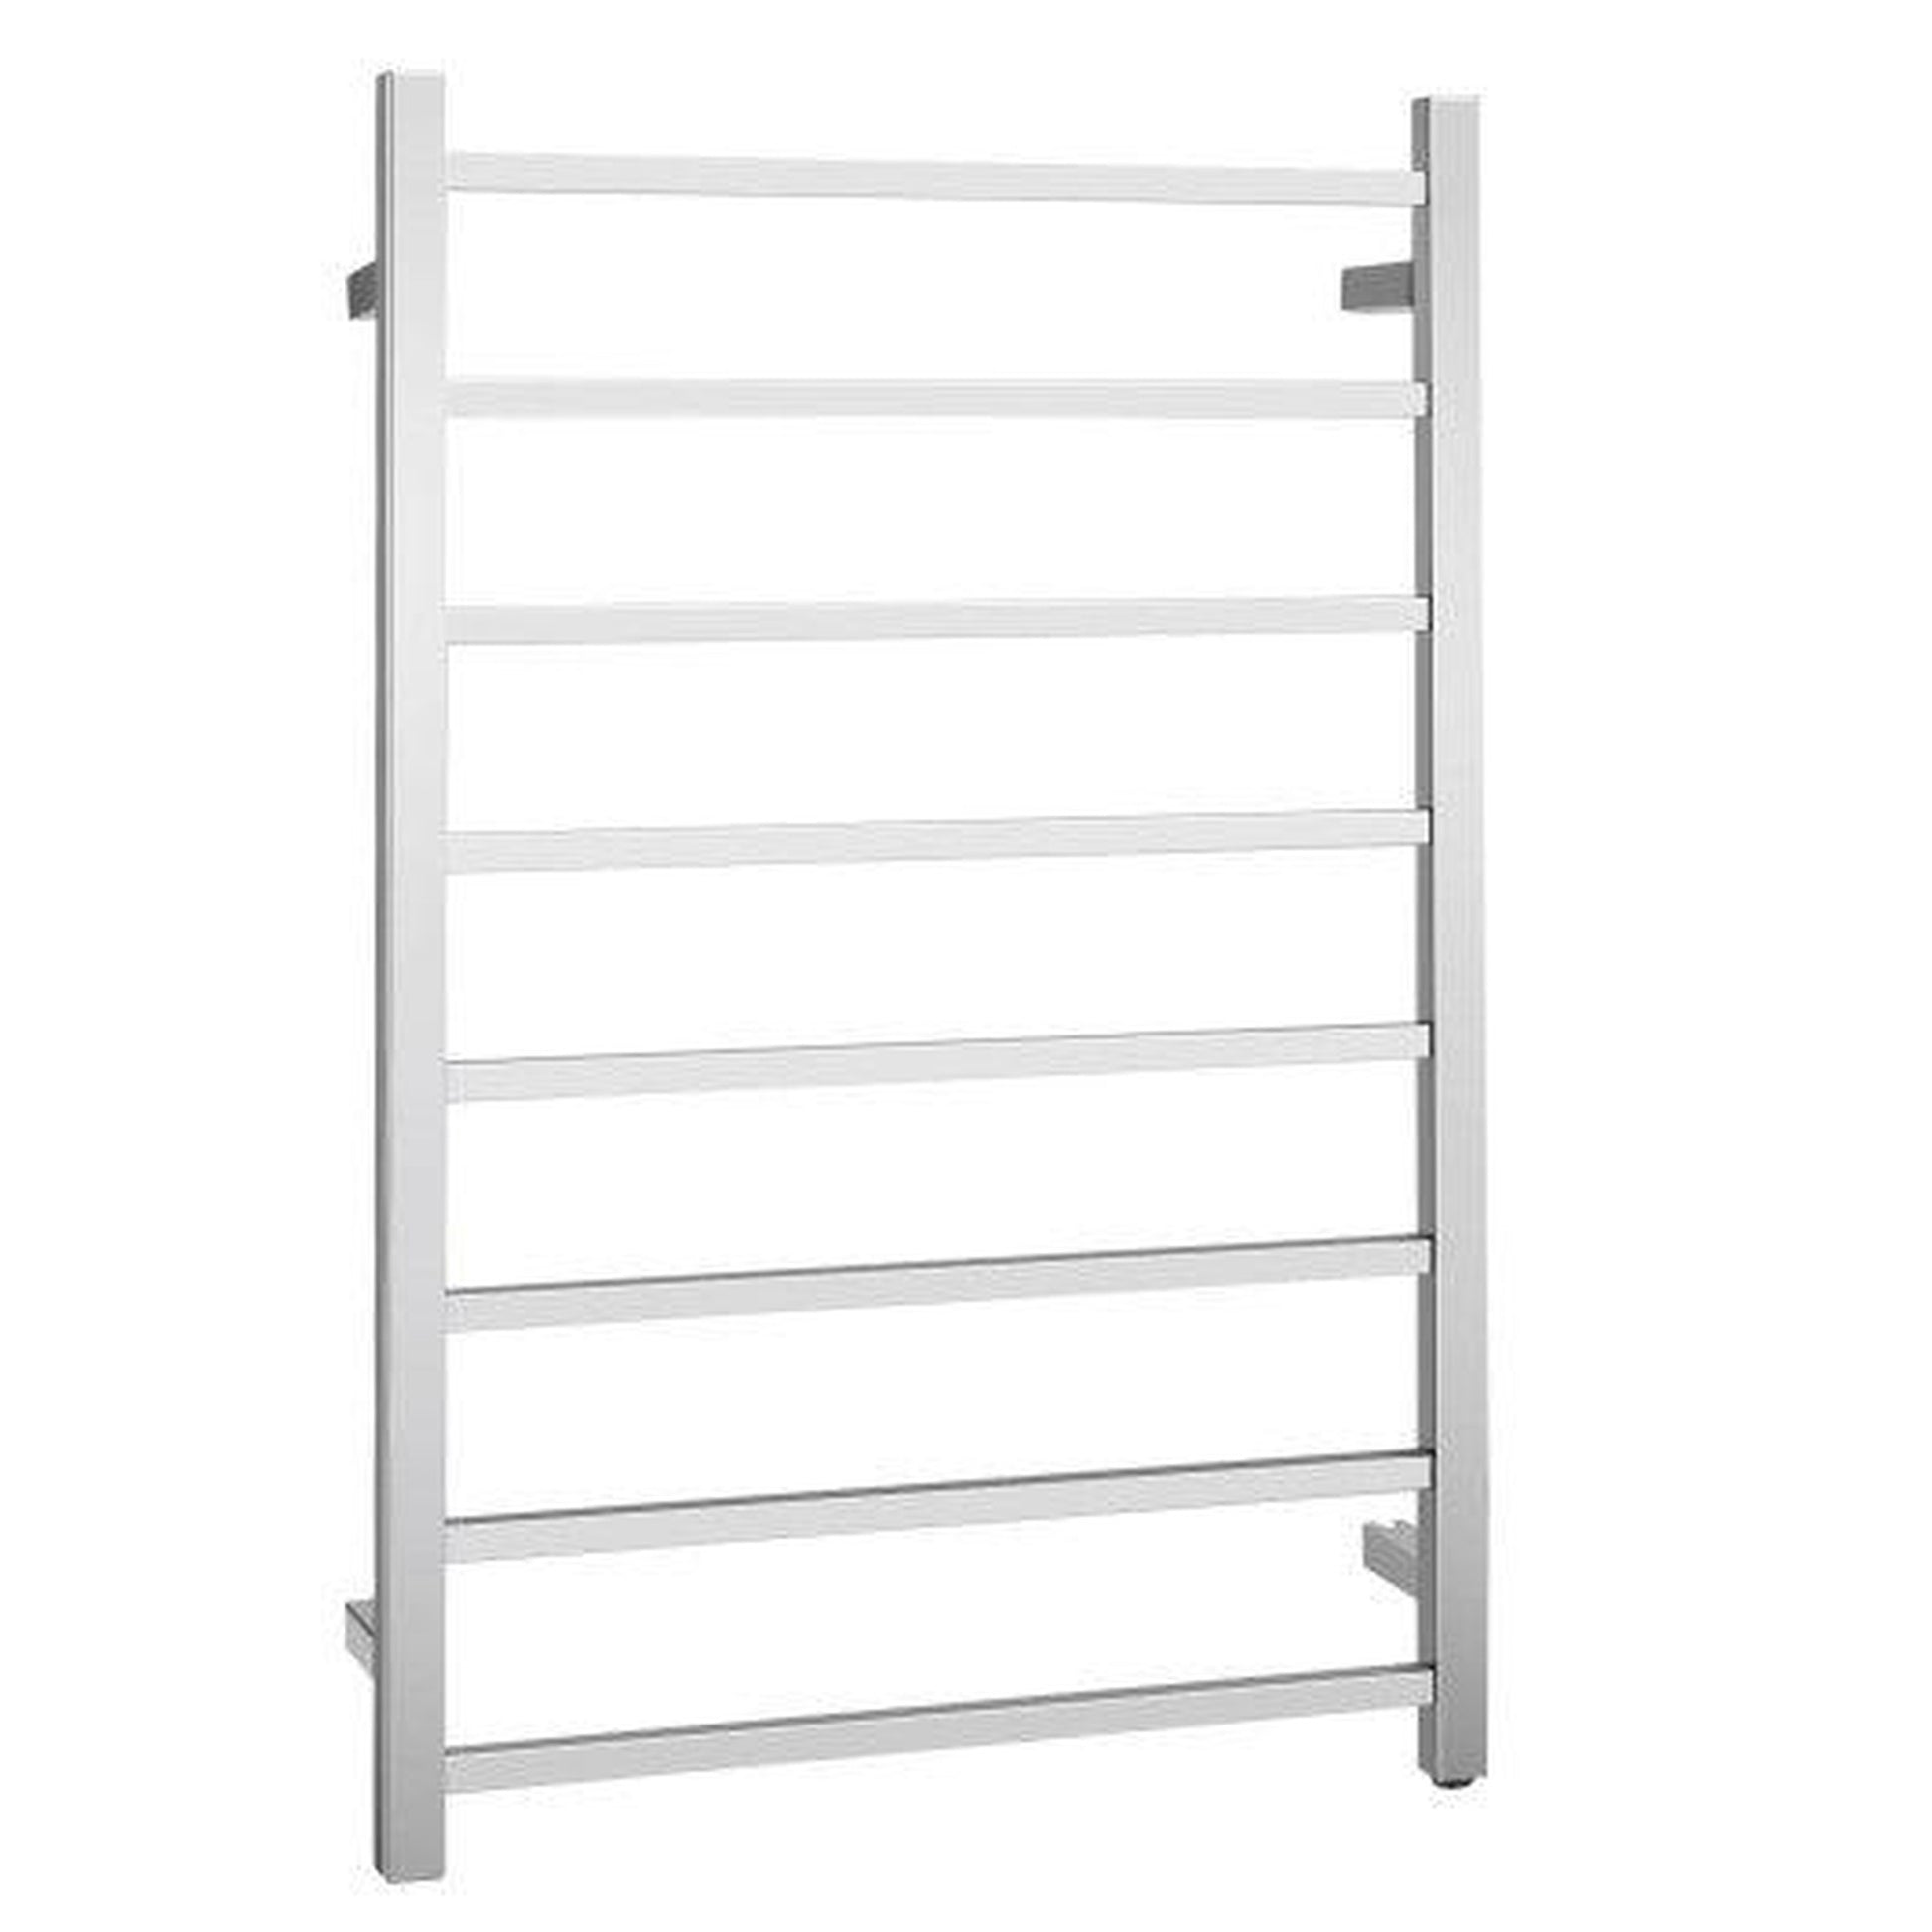 Costway 145W Electric Towel Warmer Wall Mounted Heated Drying Rack 8 Square Bars